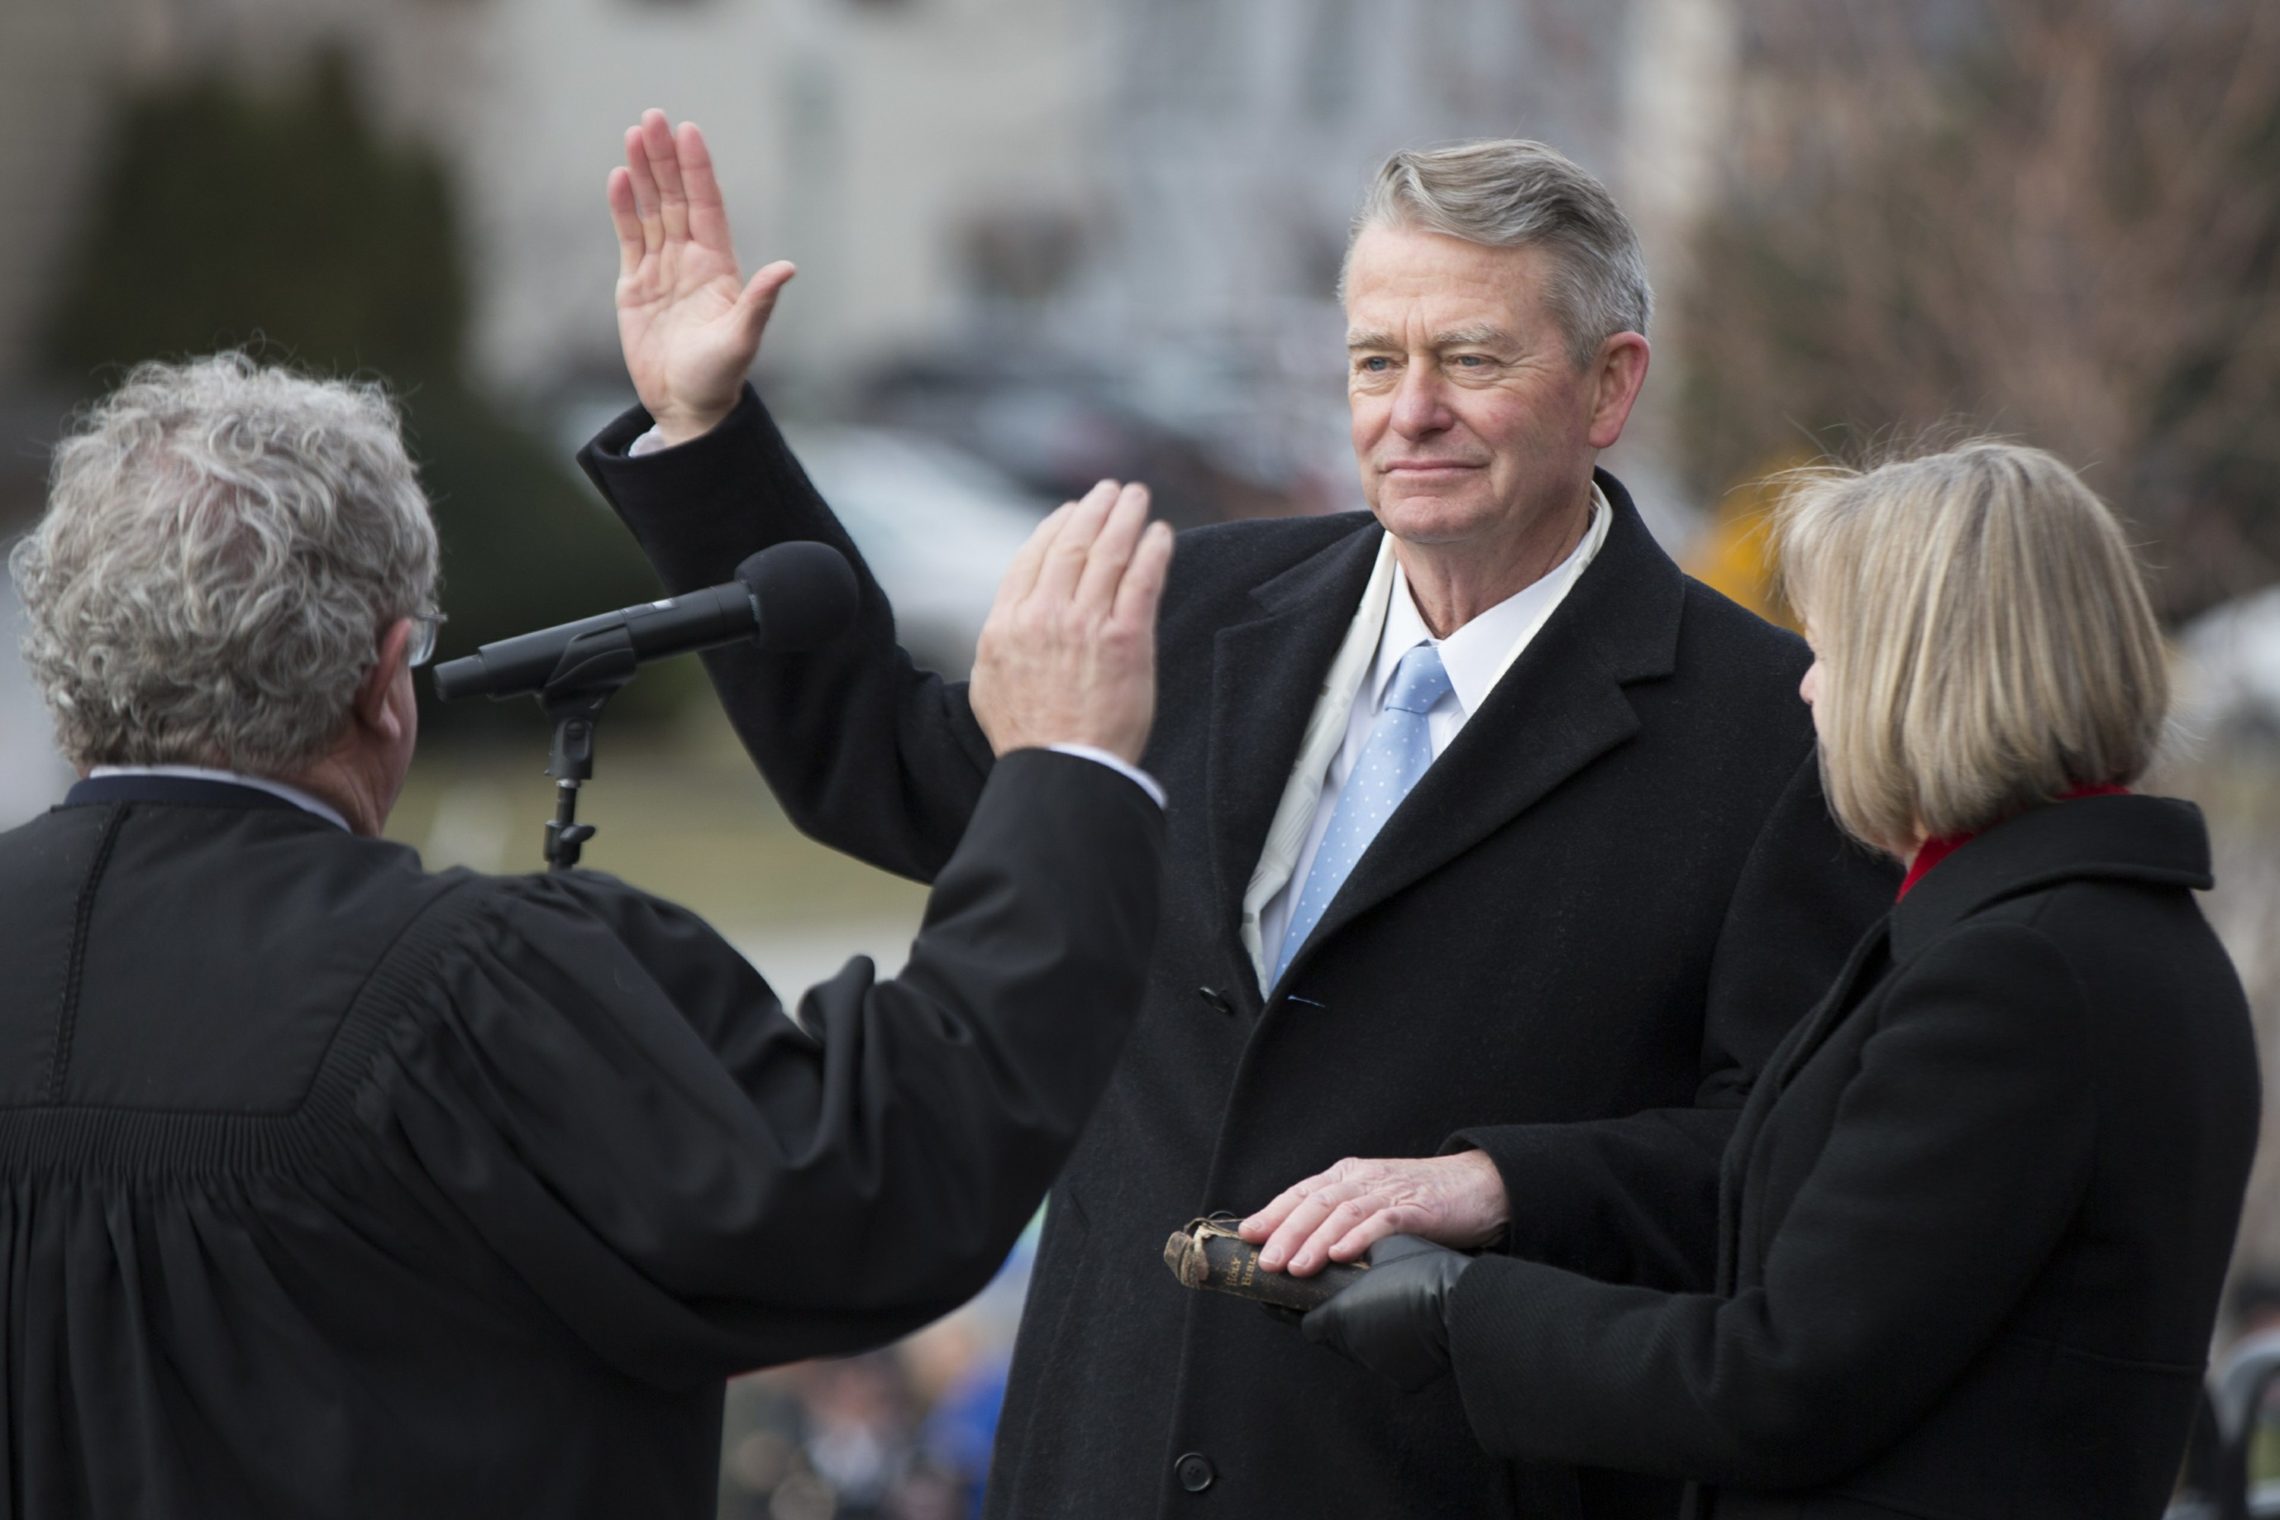 Brad Little was sworn in as Idaho's governor Friday, Jan. 4, 2019, with his wife Teresa Little holding a Bible. CREDIT: OTTO KITSINGER/AP